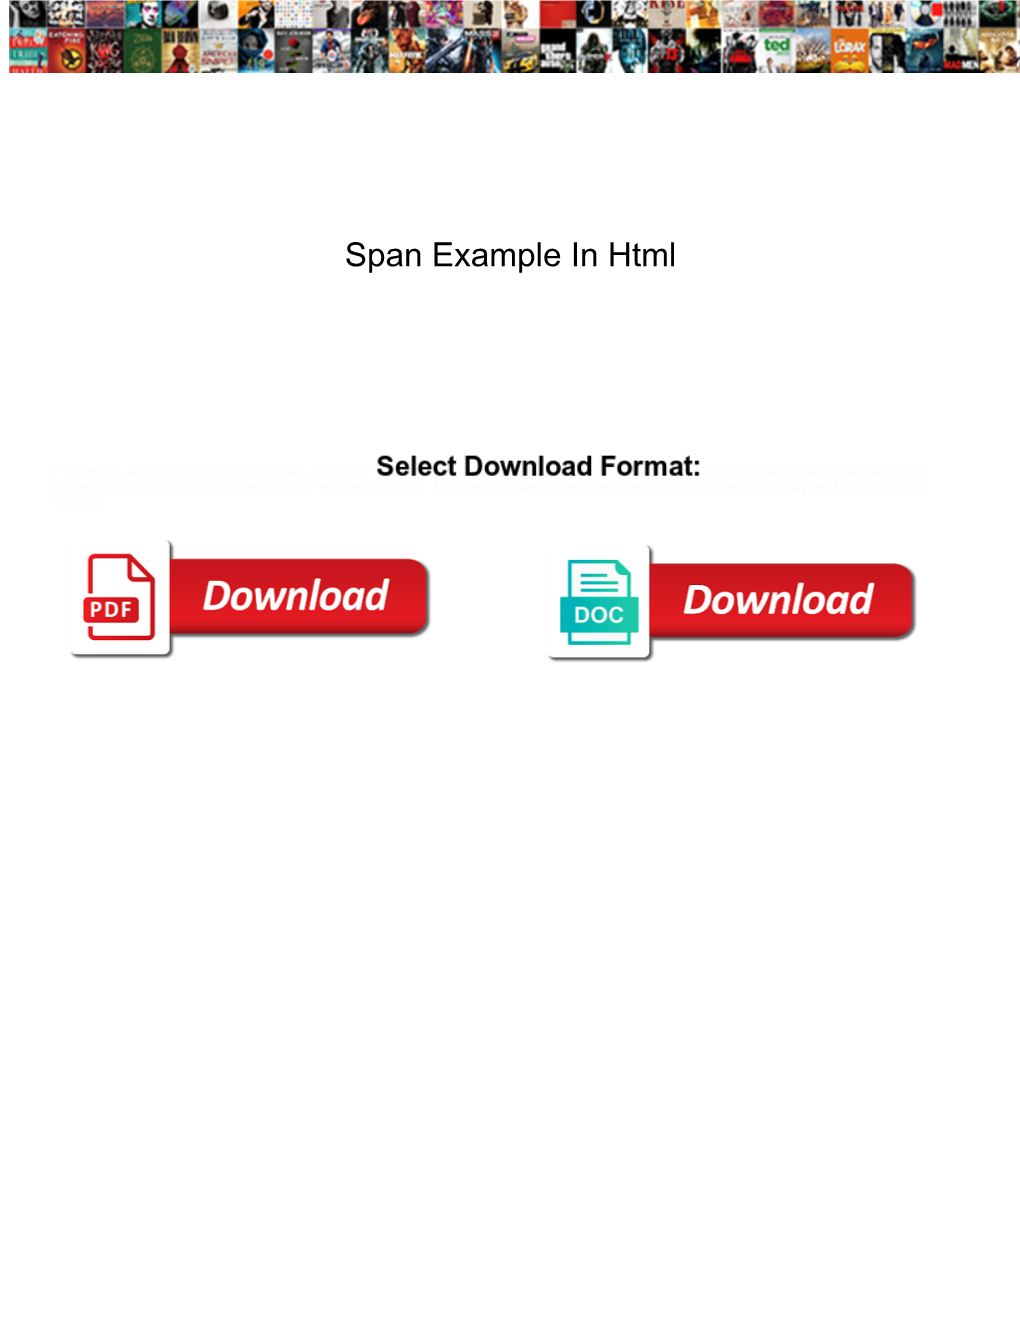 Span Example in Html